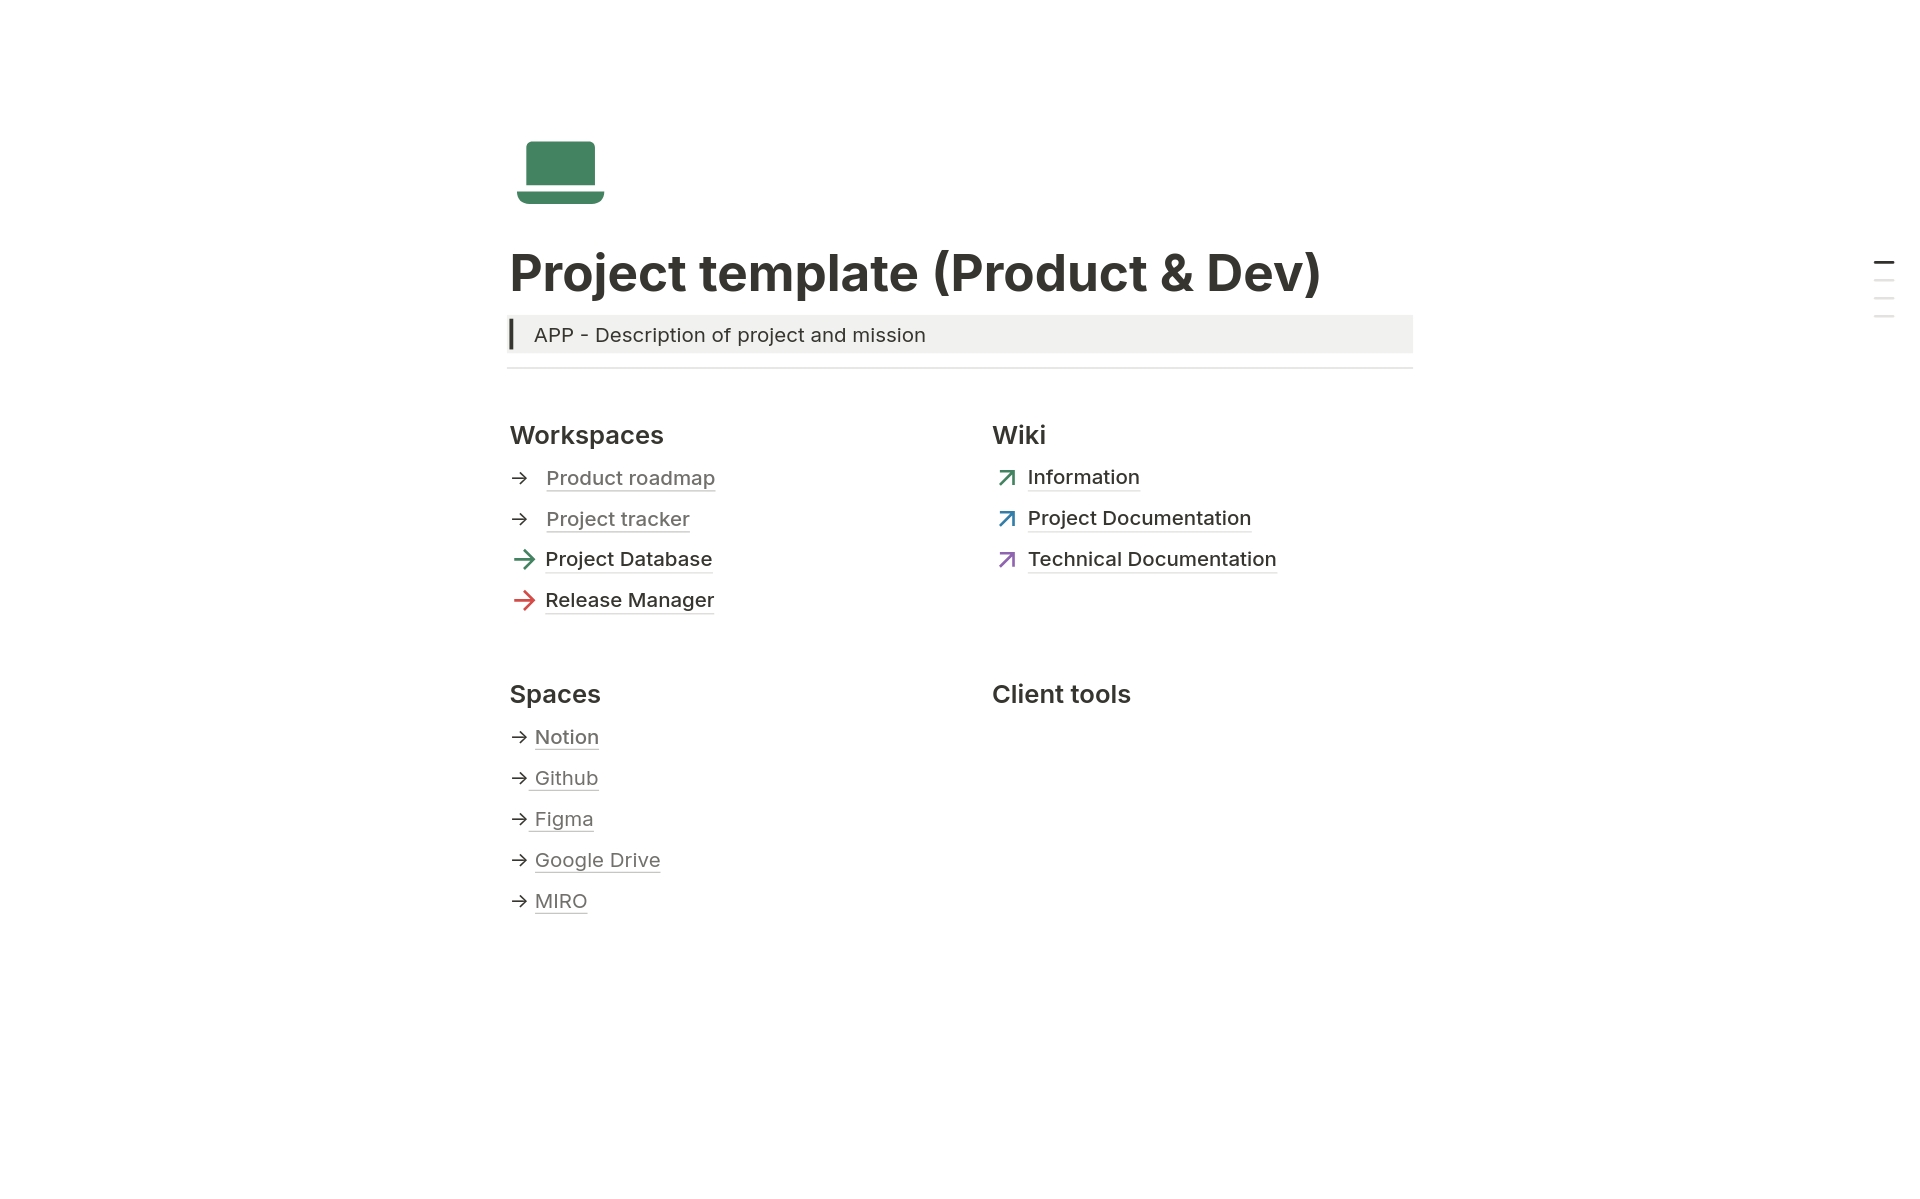 This Notion template for Product & Development projects includes workspaces for a product roadmap, project tracker, database, and release manager. It also features a wiki for information, project, and technical documentation, along with spaces for Notion, GitHub, Figma, Google Dr